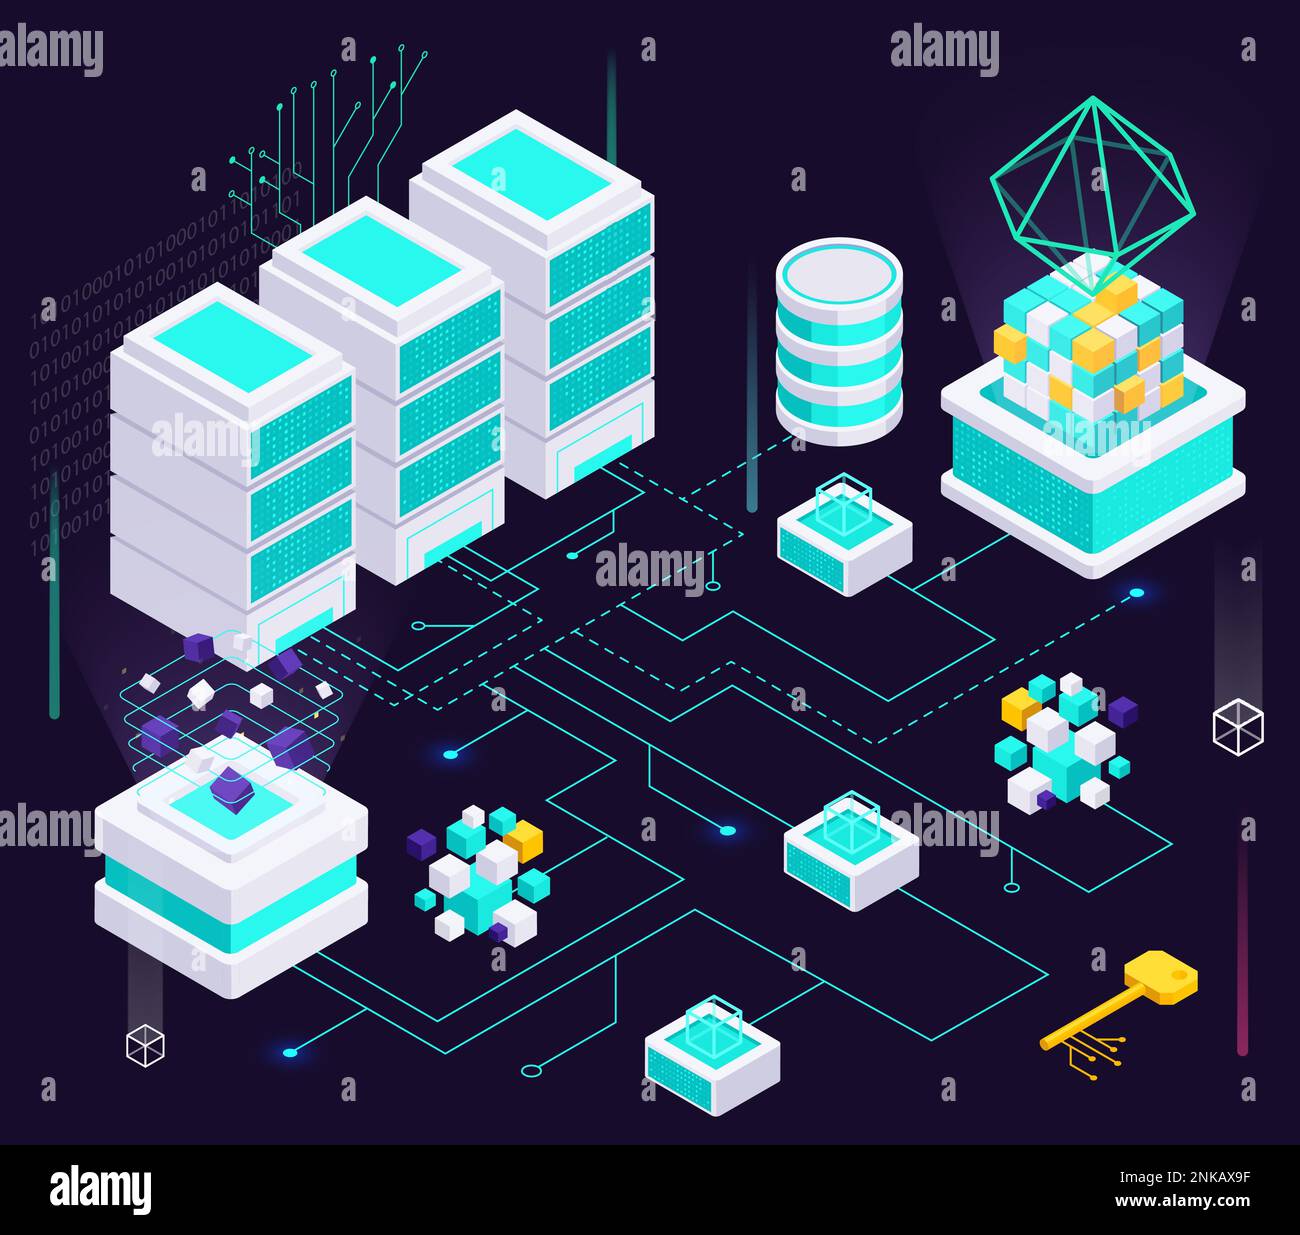 Data economy isometric composition with flowchart of digital keys neon glowing holograms cubes and server racks vector illustration Stock Vector